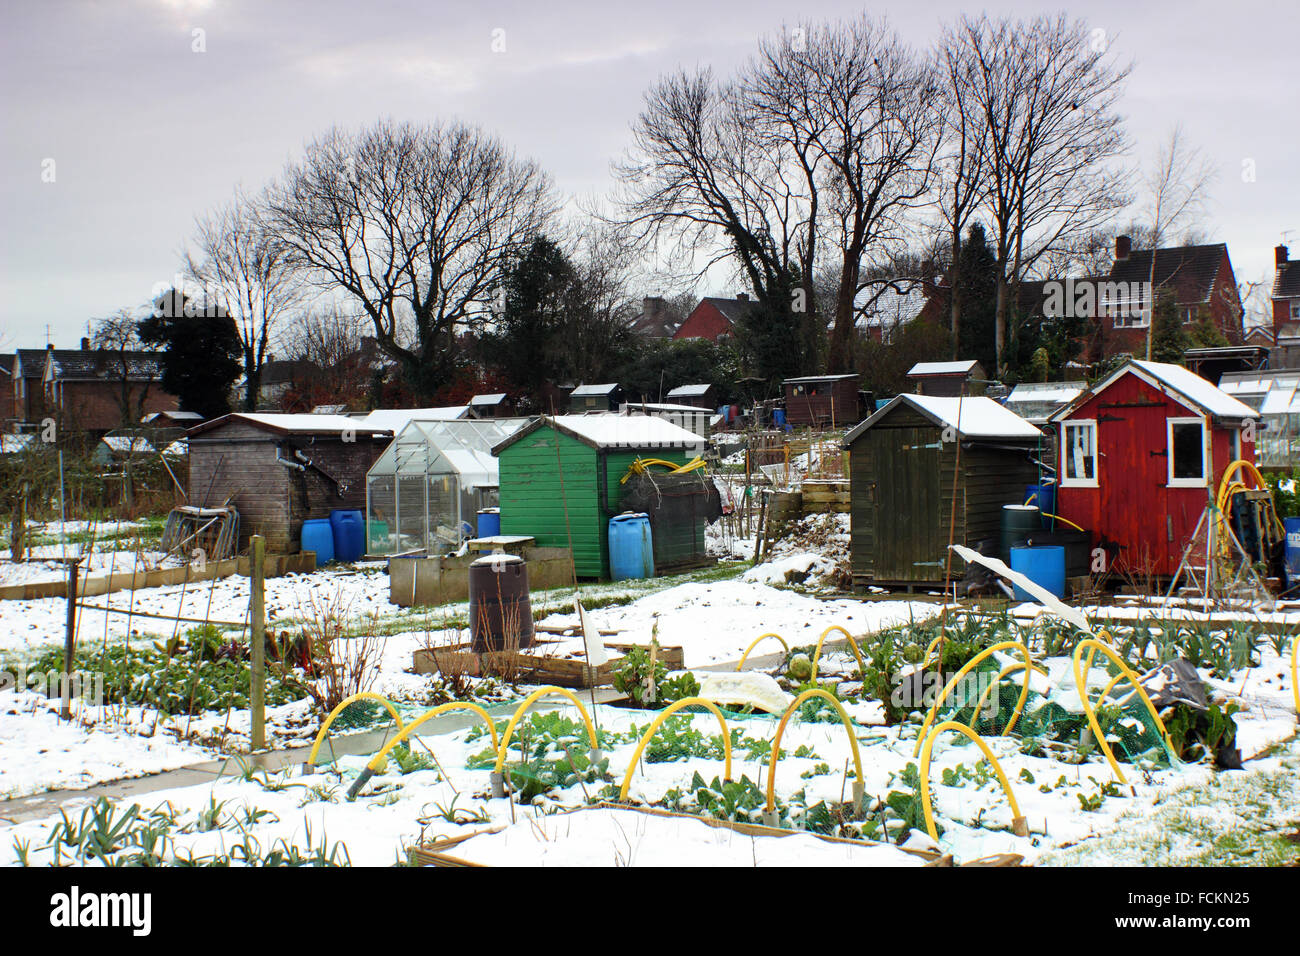 Vegetables are covered in snow in allotment gardens on a wintry day in Chesterfield,  Derbyshire England UK - January 2016 Stock Photo